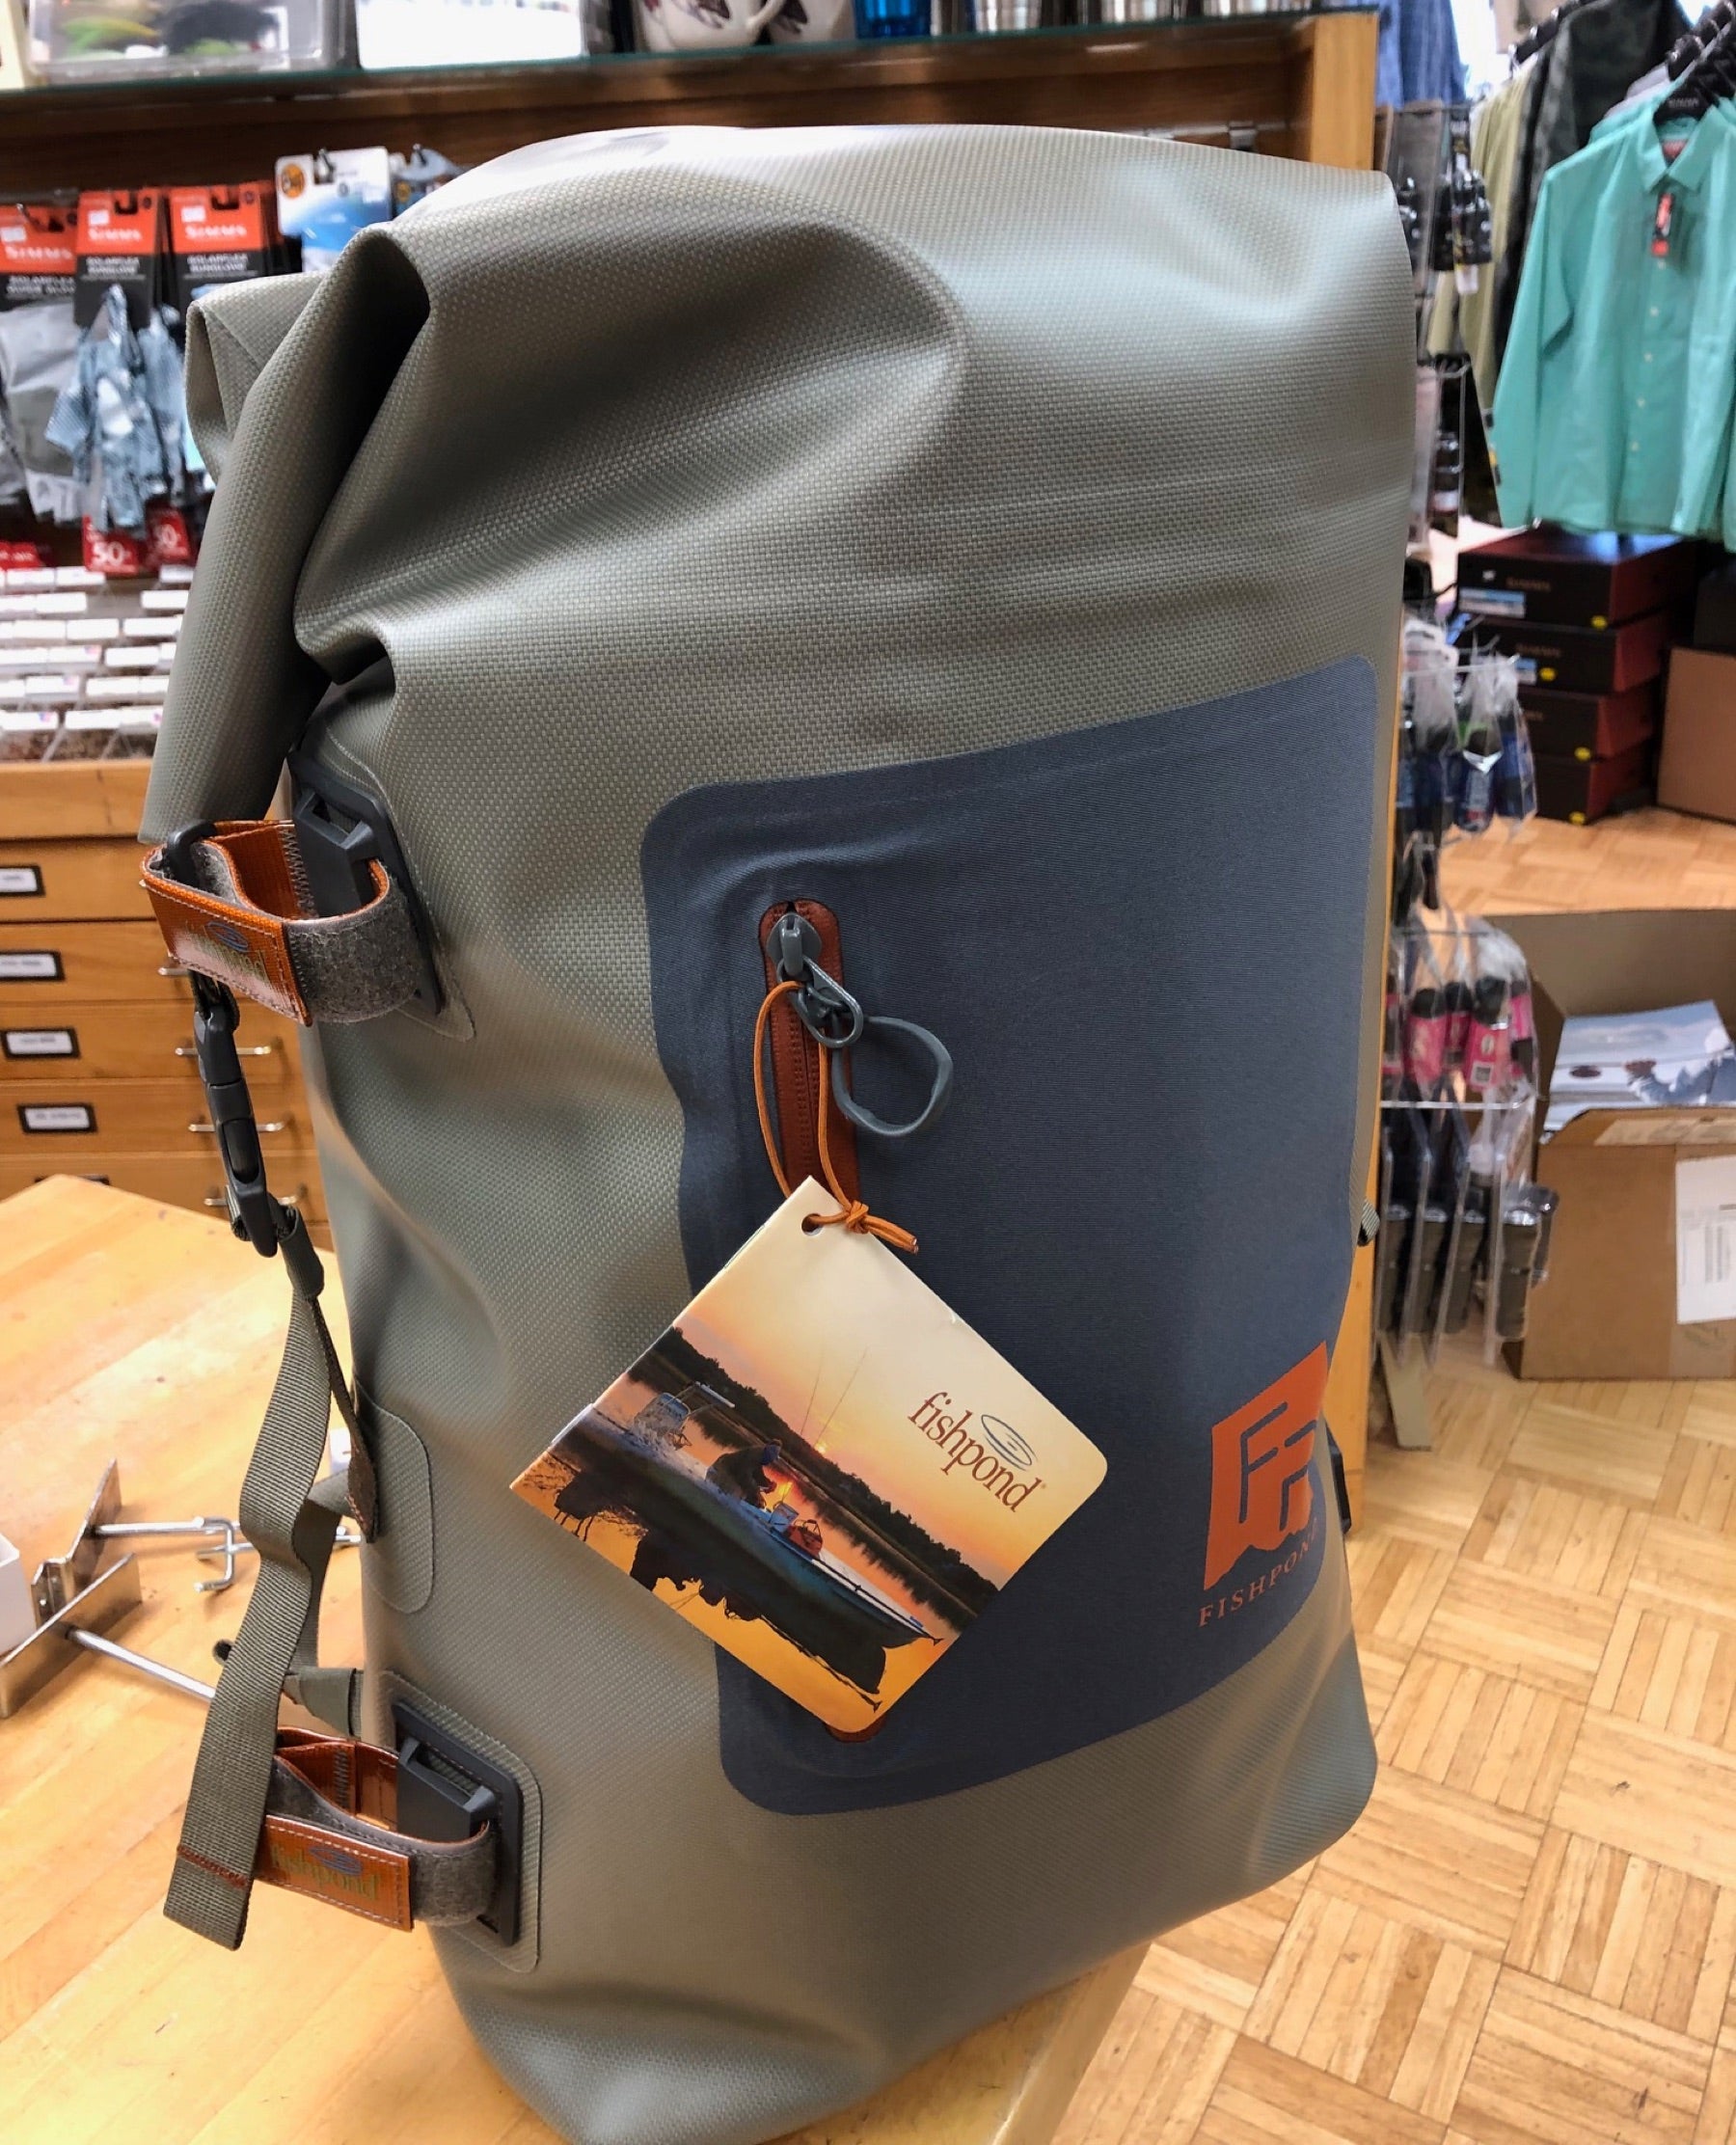 The Fishpond Roll Top Boat Bag Makes My Life A Whole Lot Easier  Fly  Fishing  Gink and Gasoline  How to Fly Fish  Trout Fishing  Fly Tying   Fly Fishing Blog